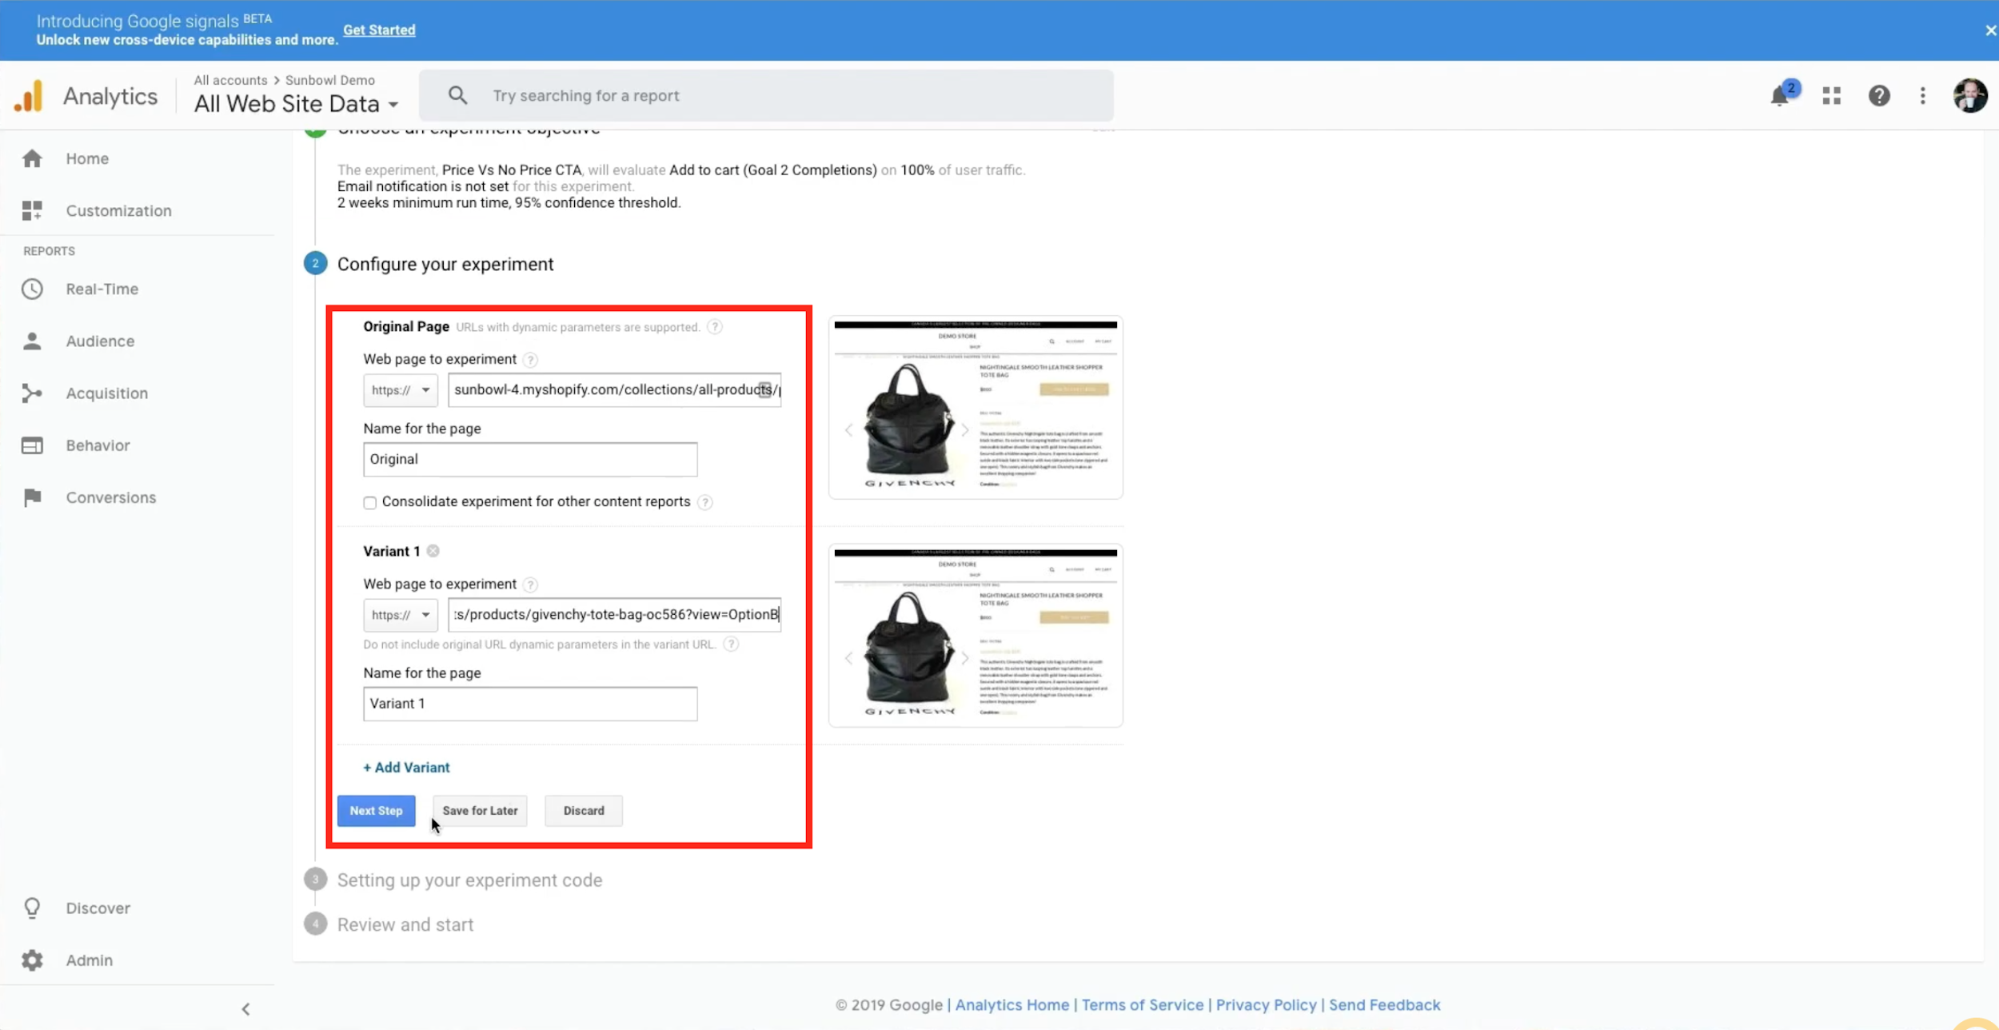 Merchant is adding the two Shopify product variants to Google Analytics for testing